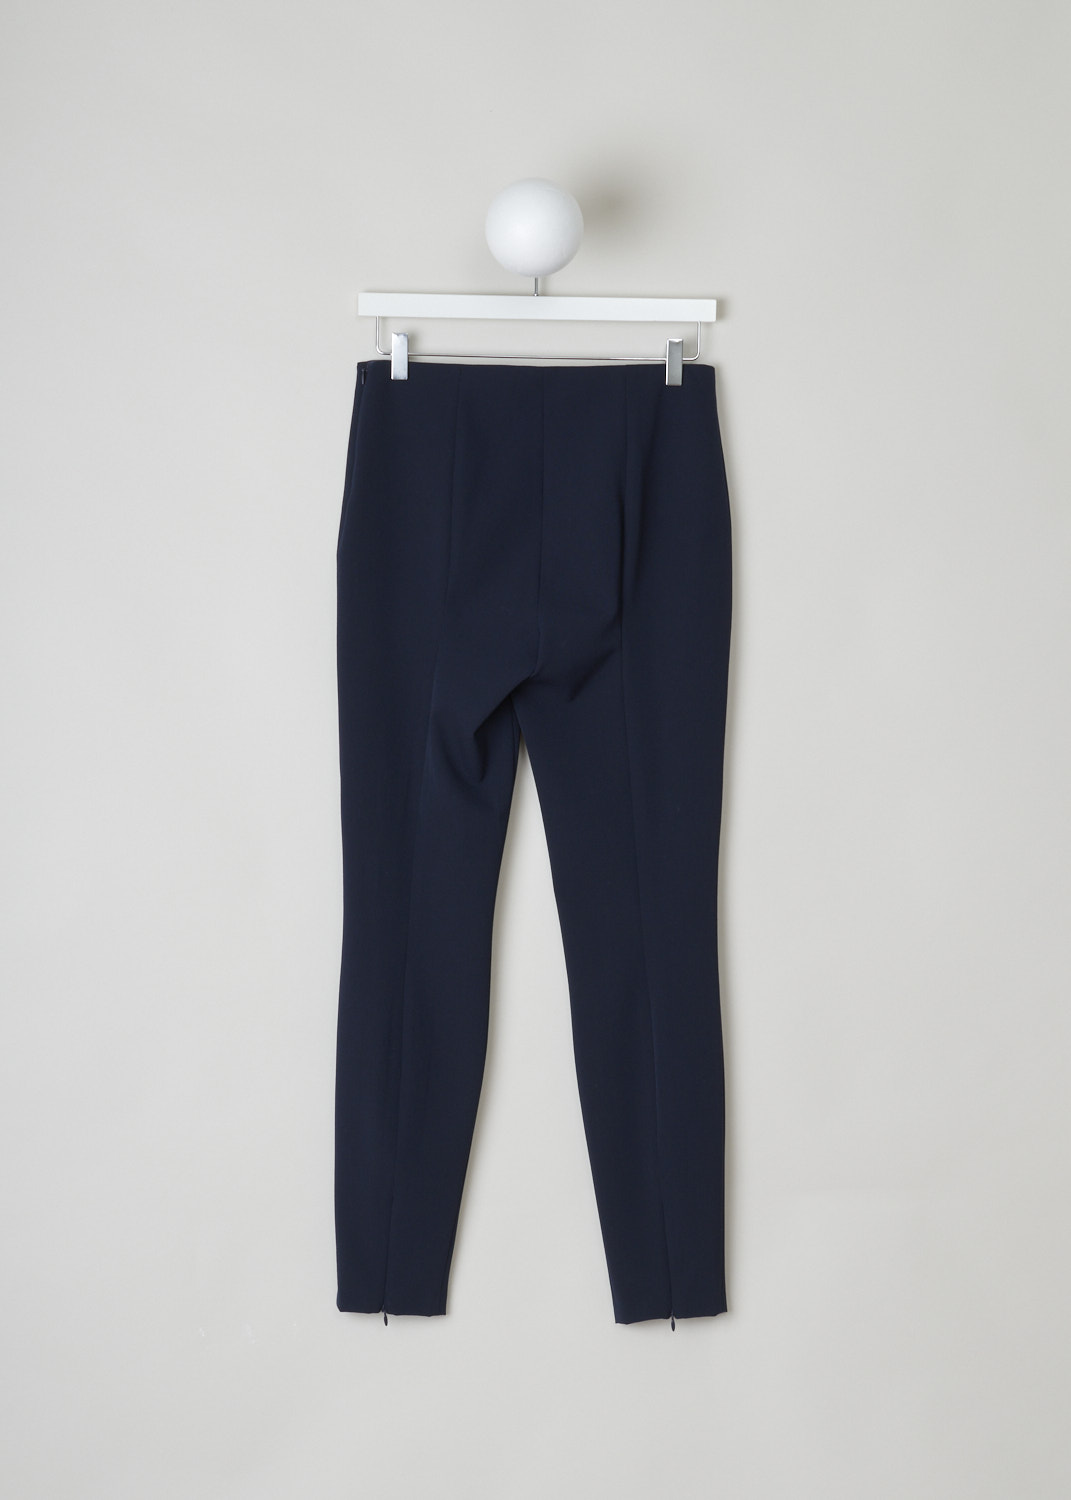 The row, Midnight blue straight pants, losso_pant_4232WI_223_midnight_blue, blue, back, This midnight blue straight pants, know for its modesty, comes without waistband, belt loops or pockets. Featuring a slim fit, zipper on the side seam for closure and instead of a pleat decorating the pants this model has a seam running down the pants. 